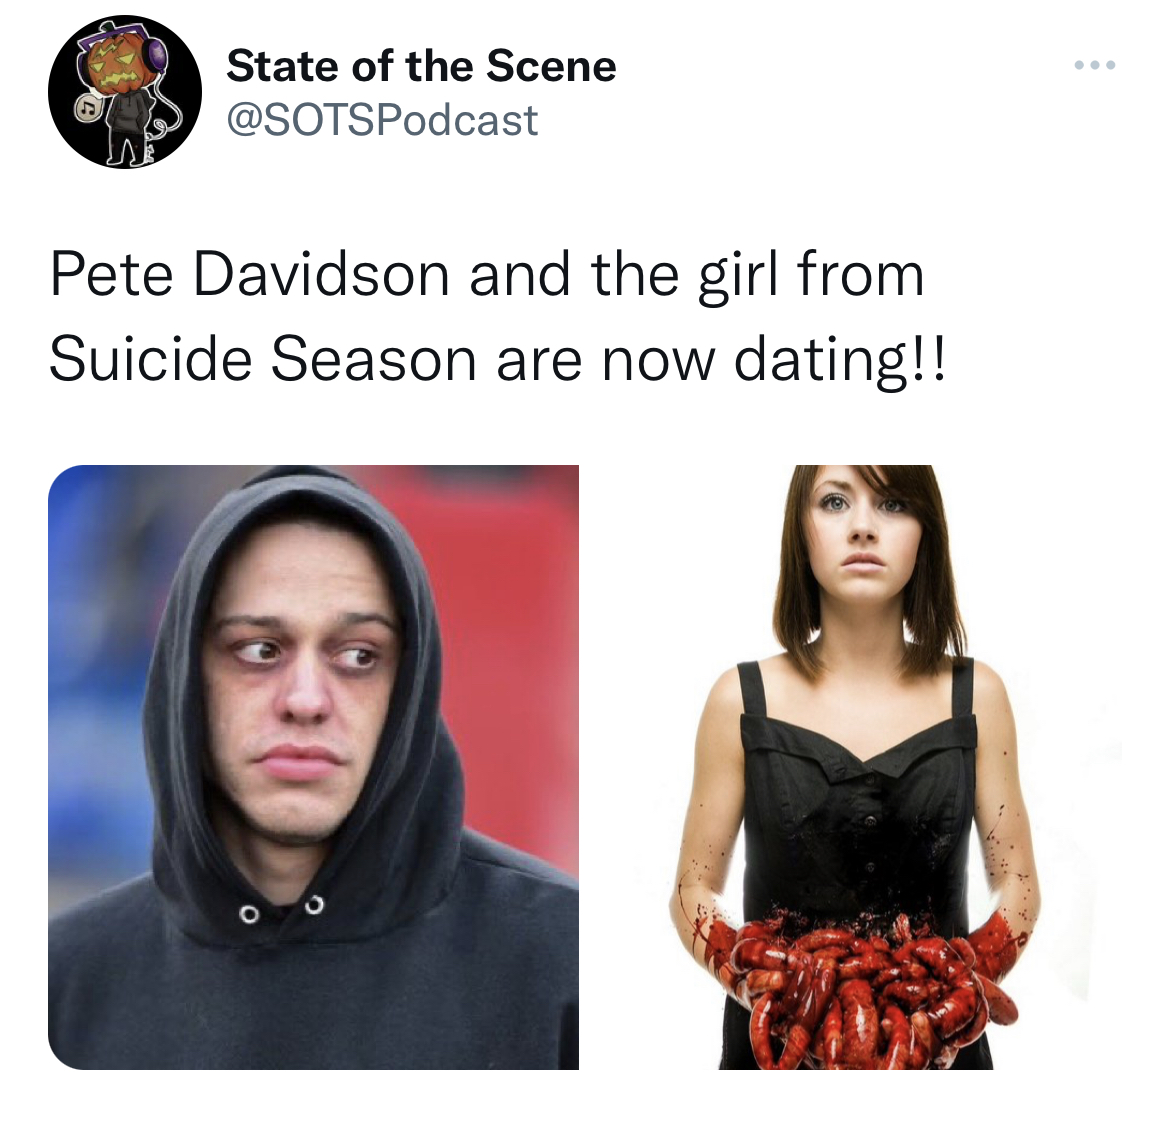 Tweets roasting celebrities - bmth suicide season cover - State of the Scene Pete Davidson and the girl from Suicide Season are now dating!!